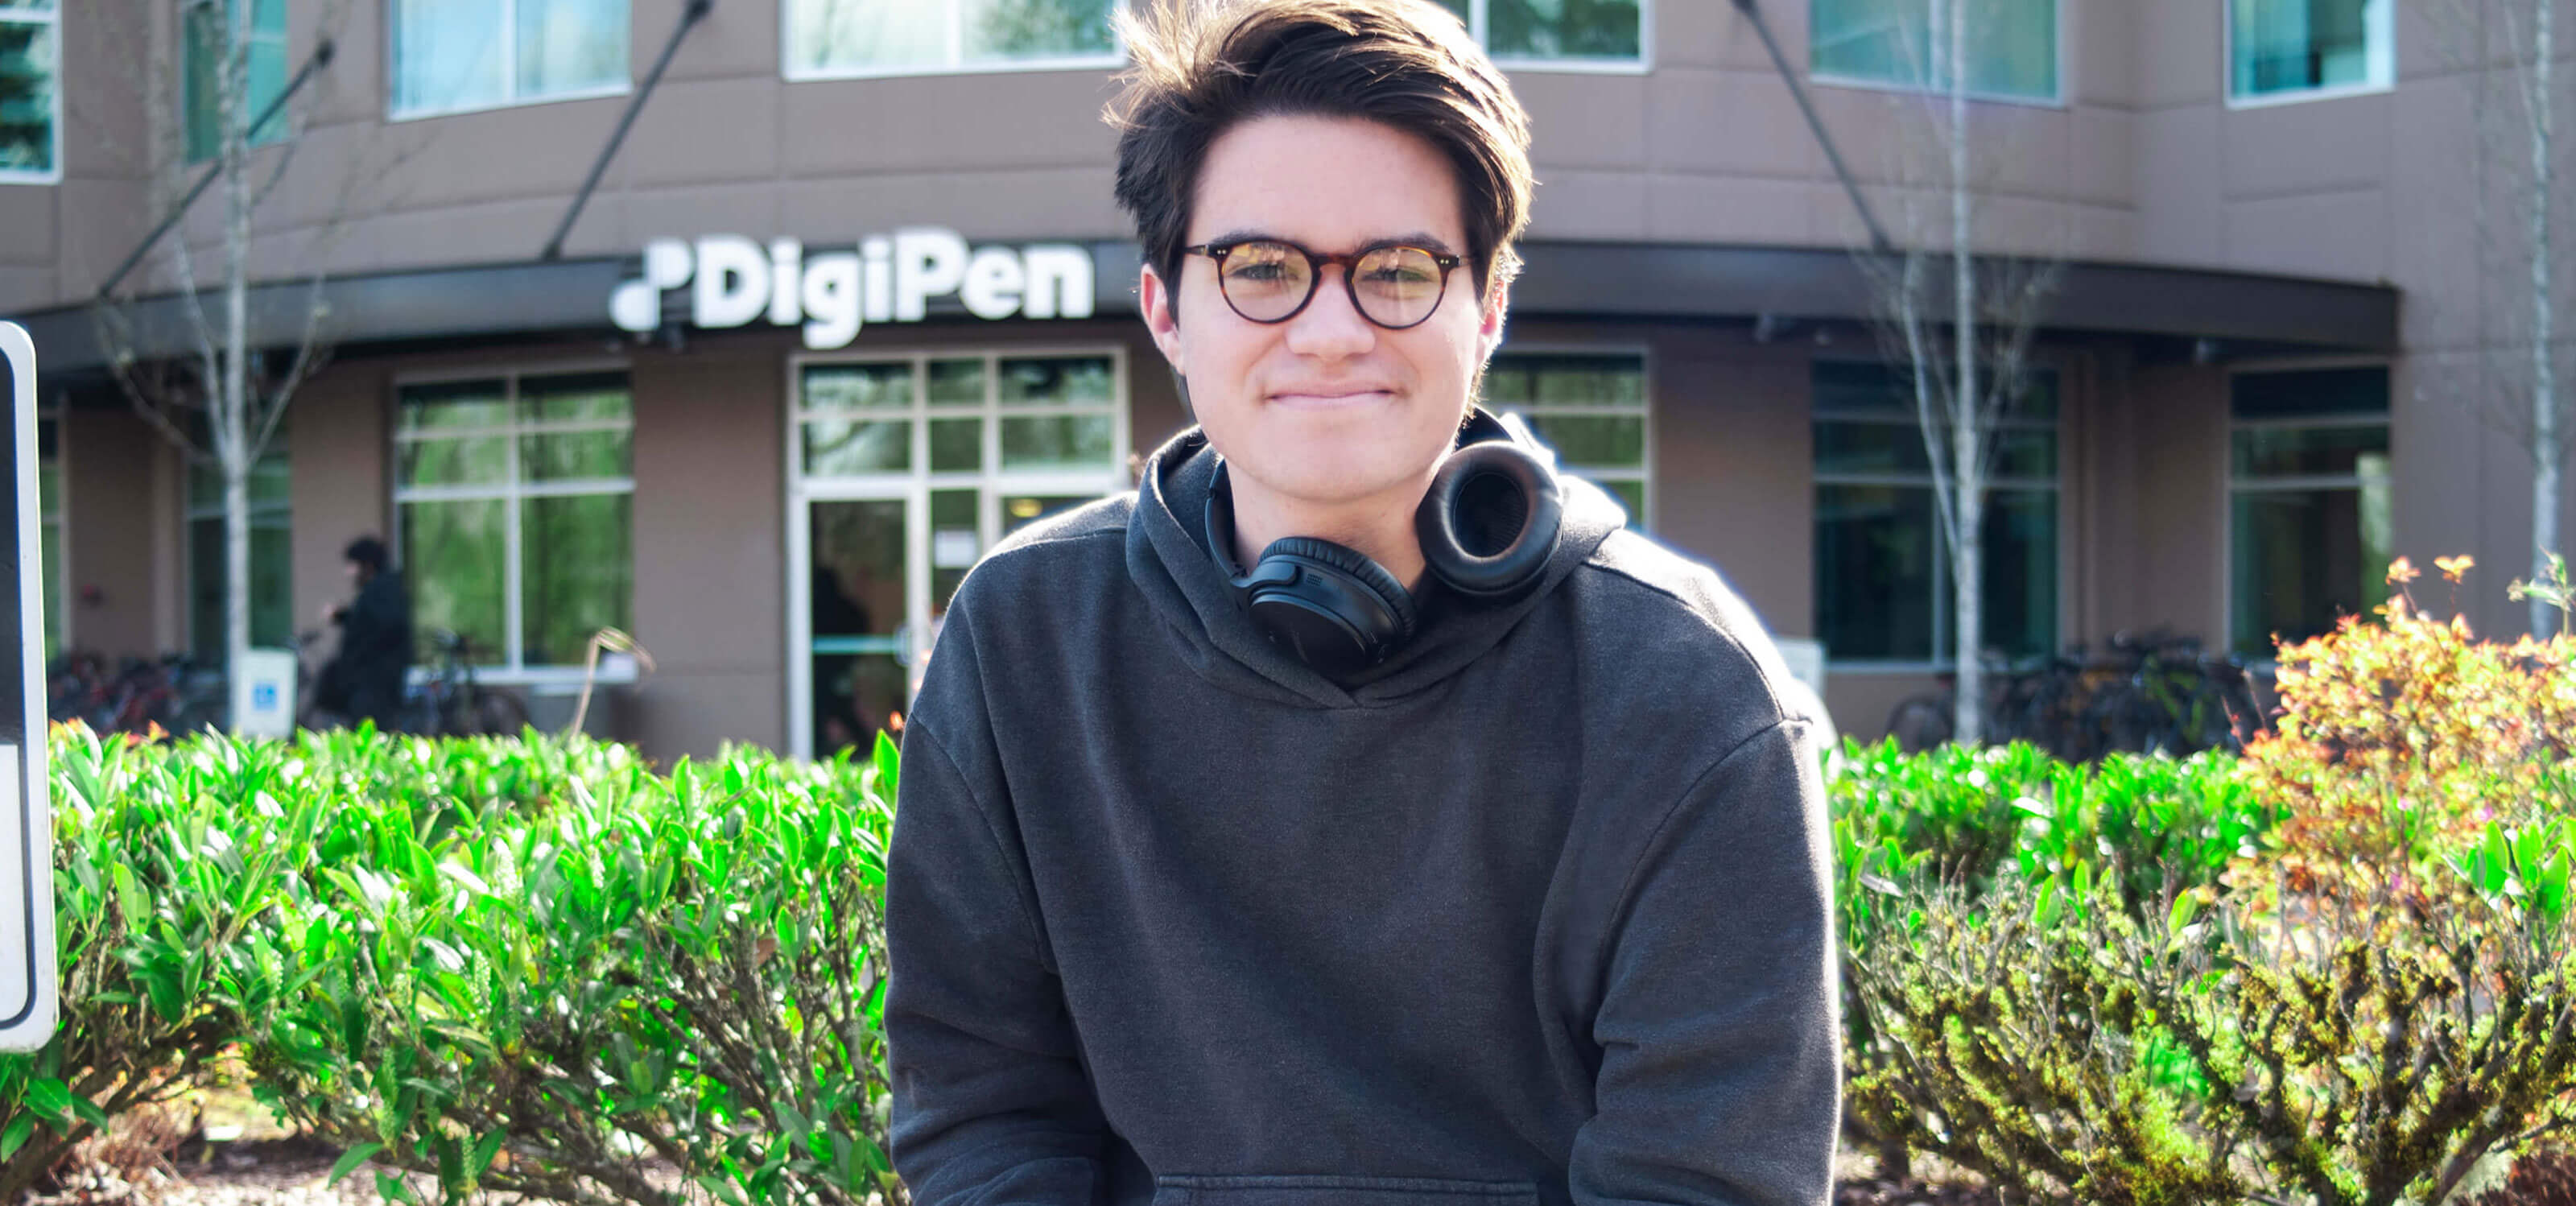 A student wearing headphones smiles on a sunny day in front of the DigiPen building